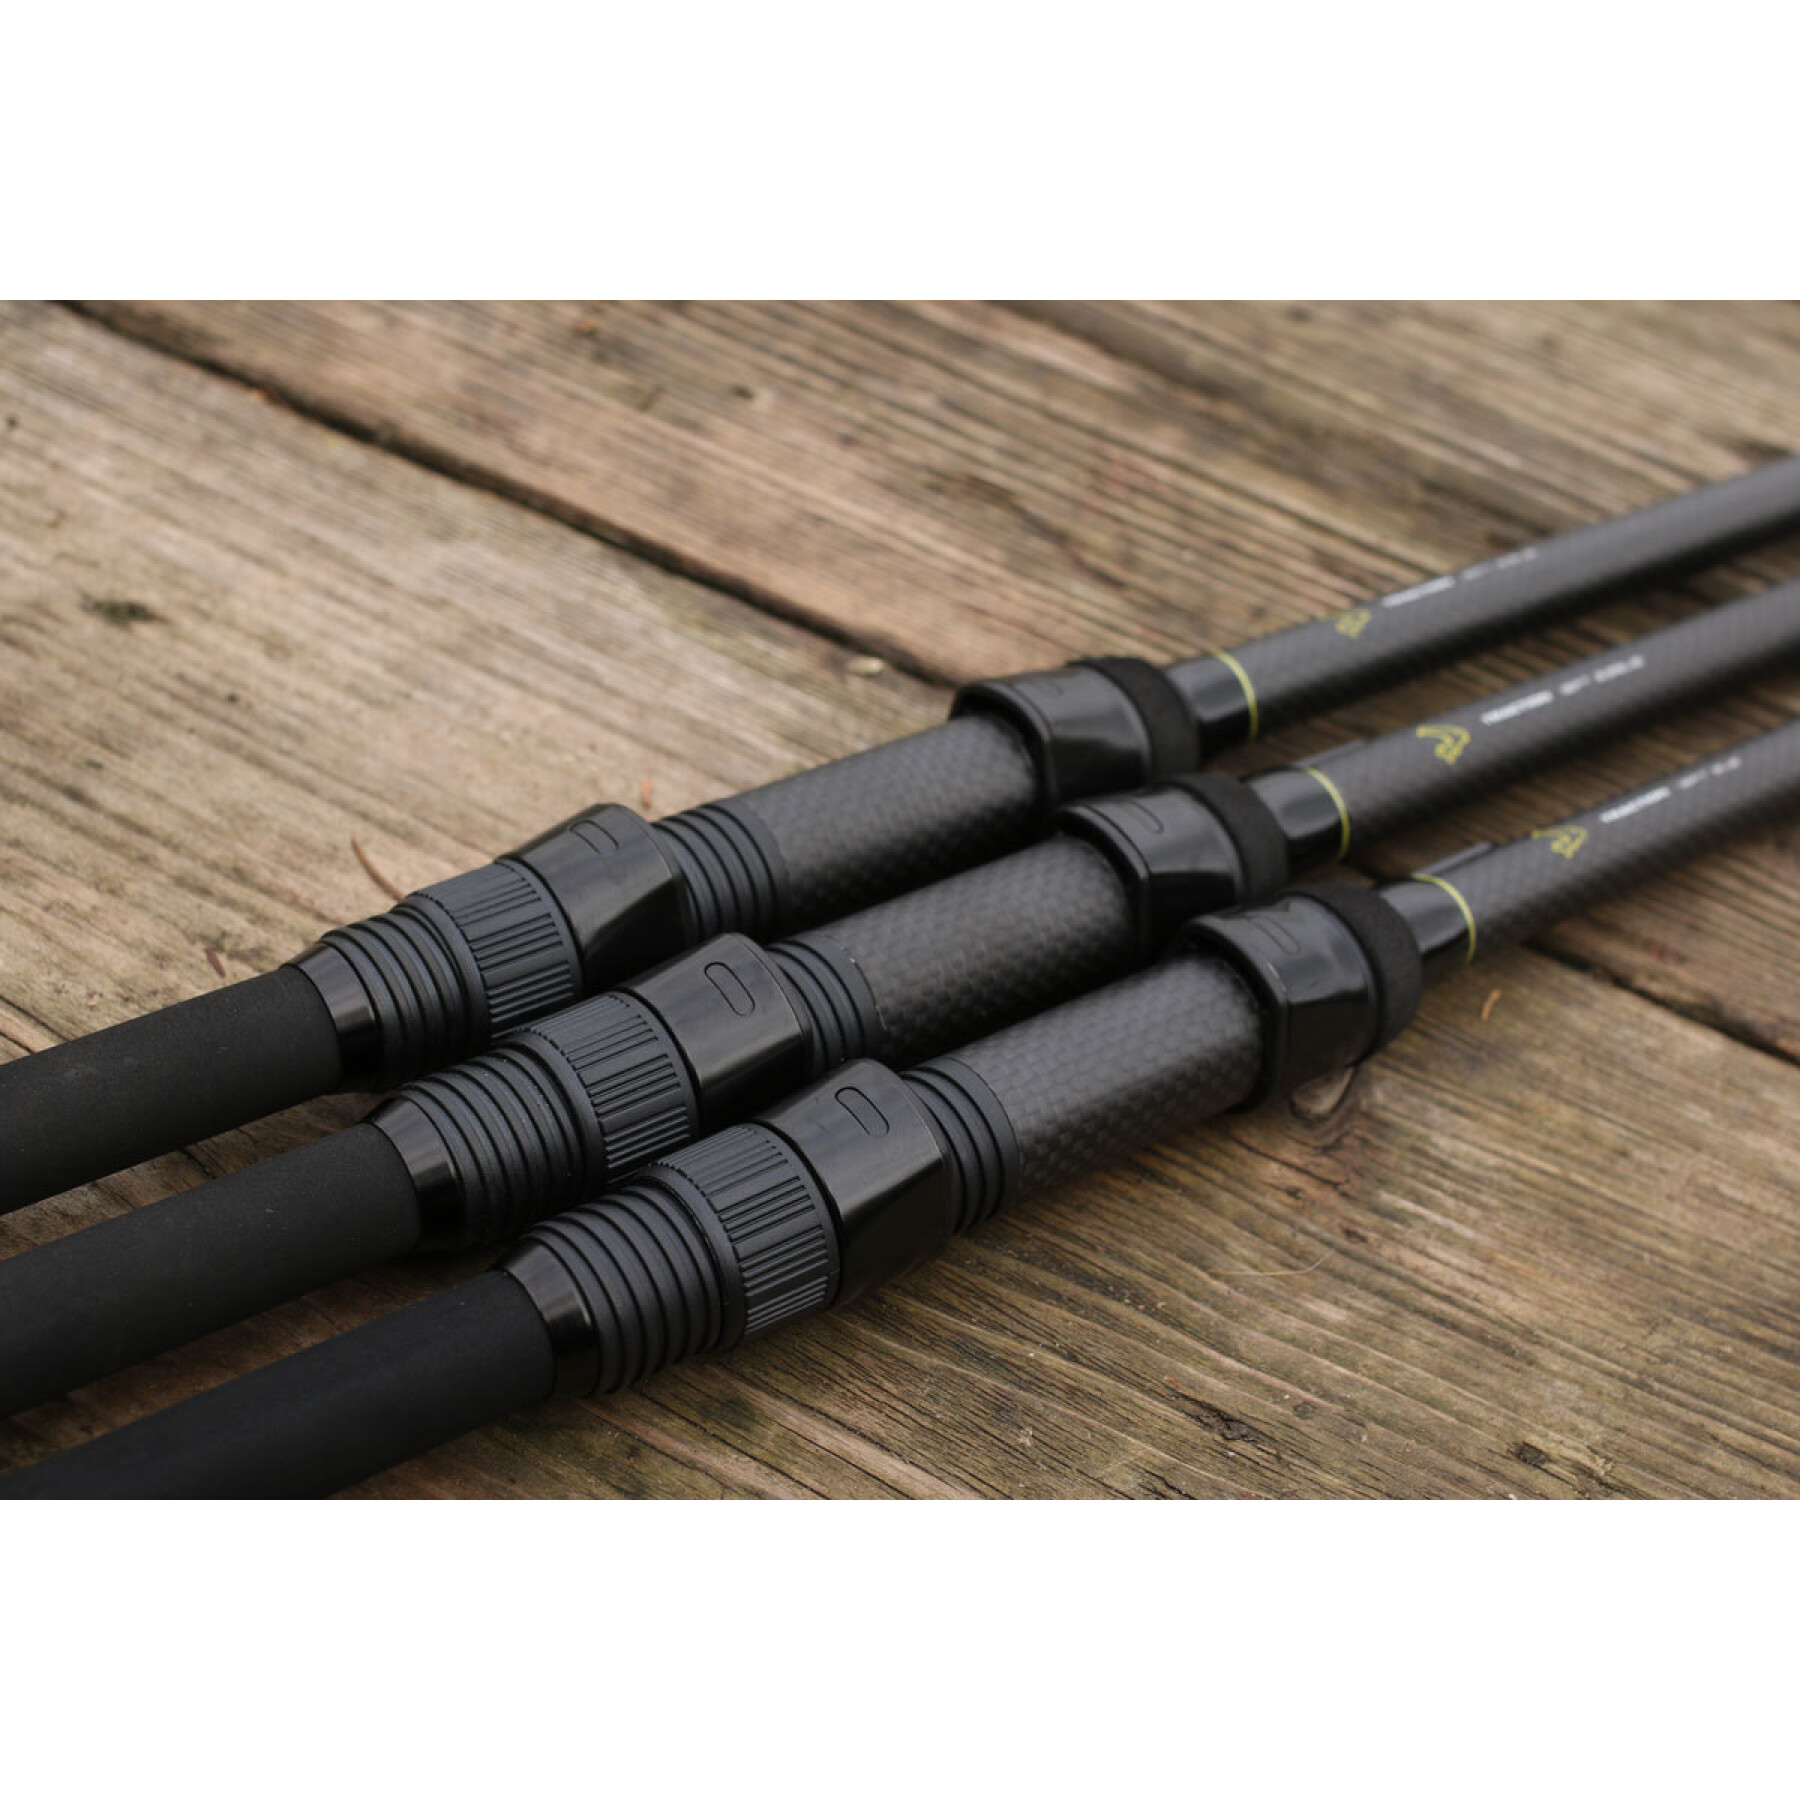 Aste Avid Traction CT rod 12ft 2.5lb